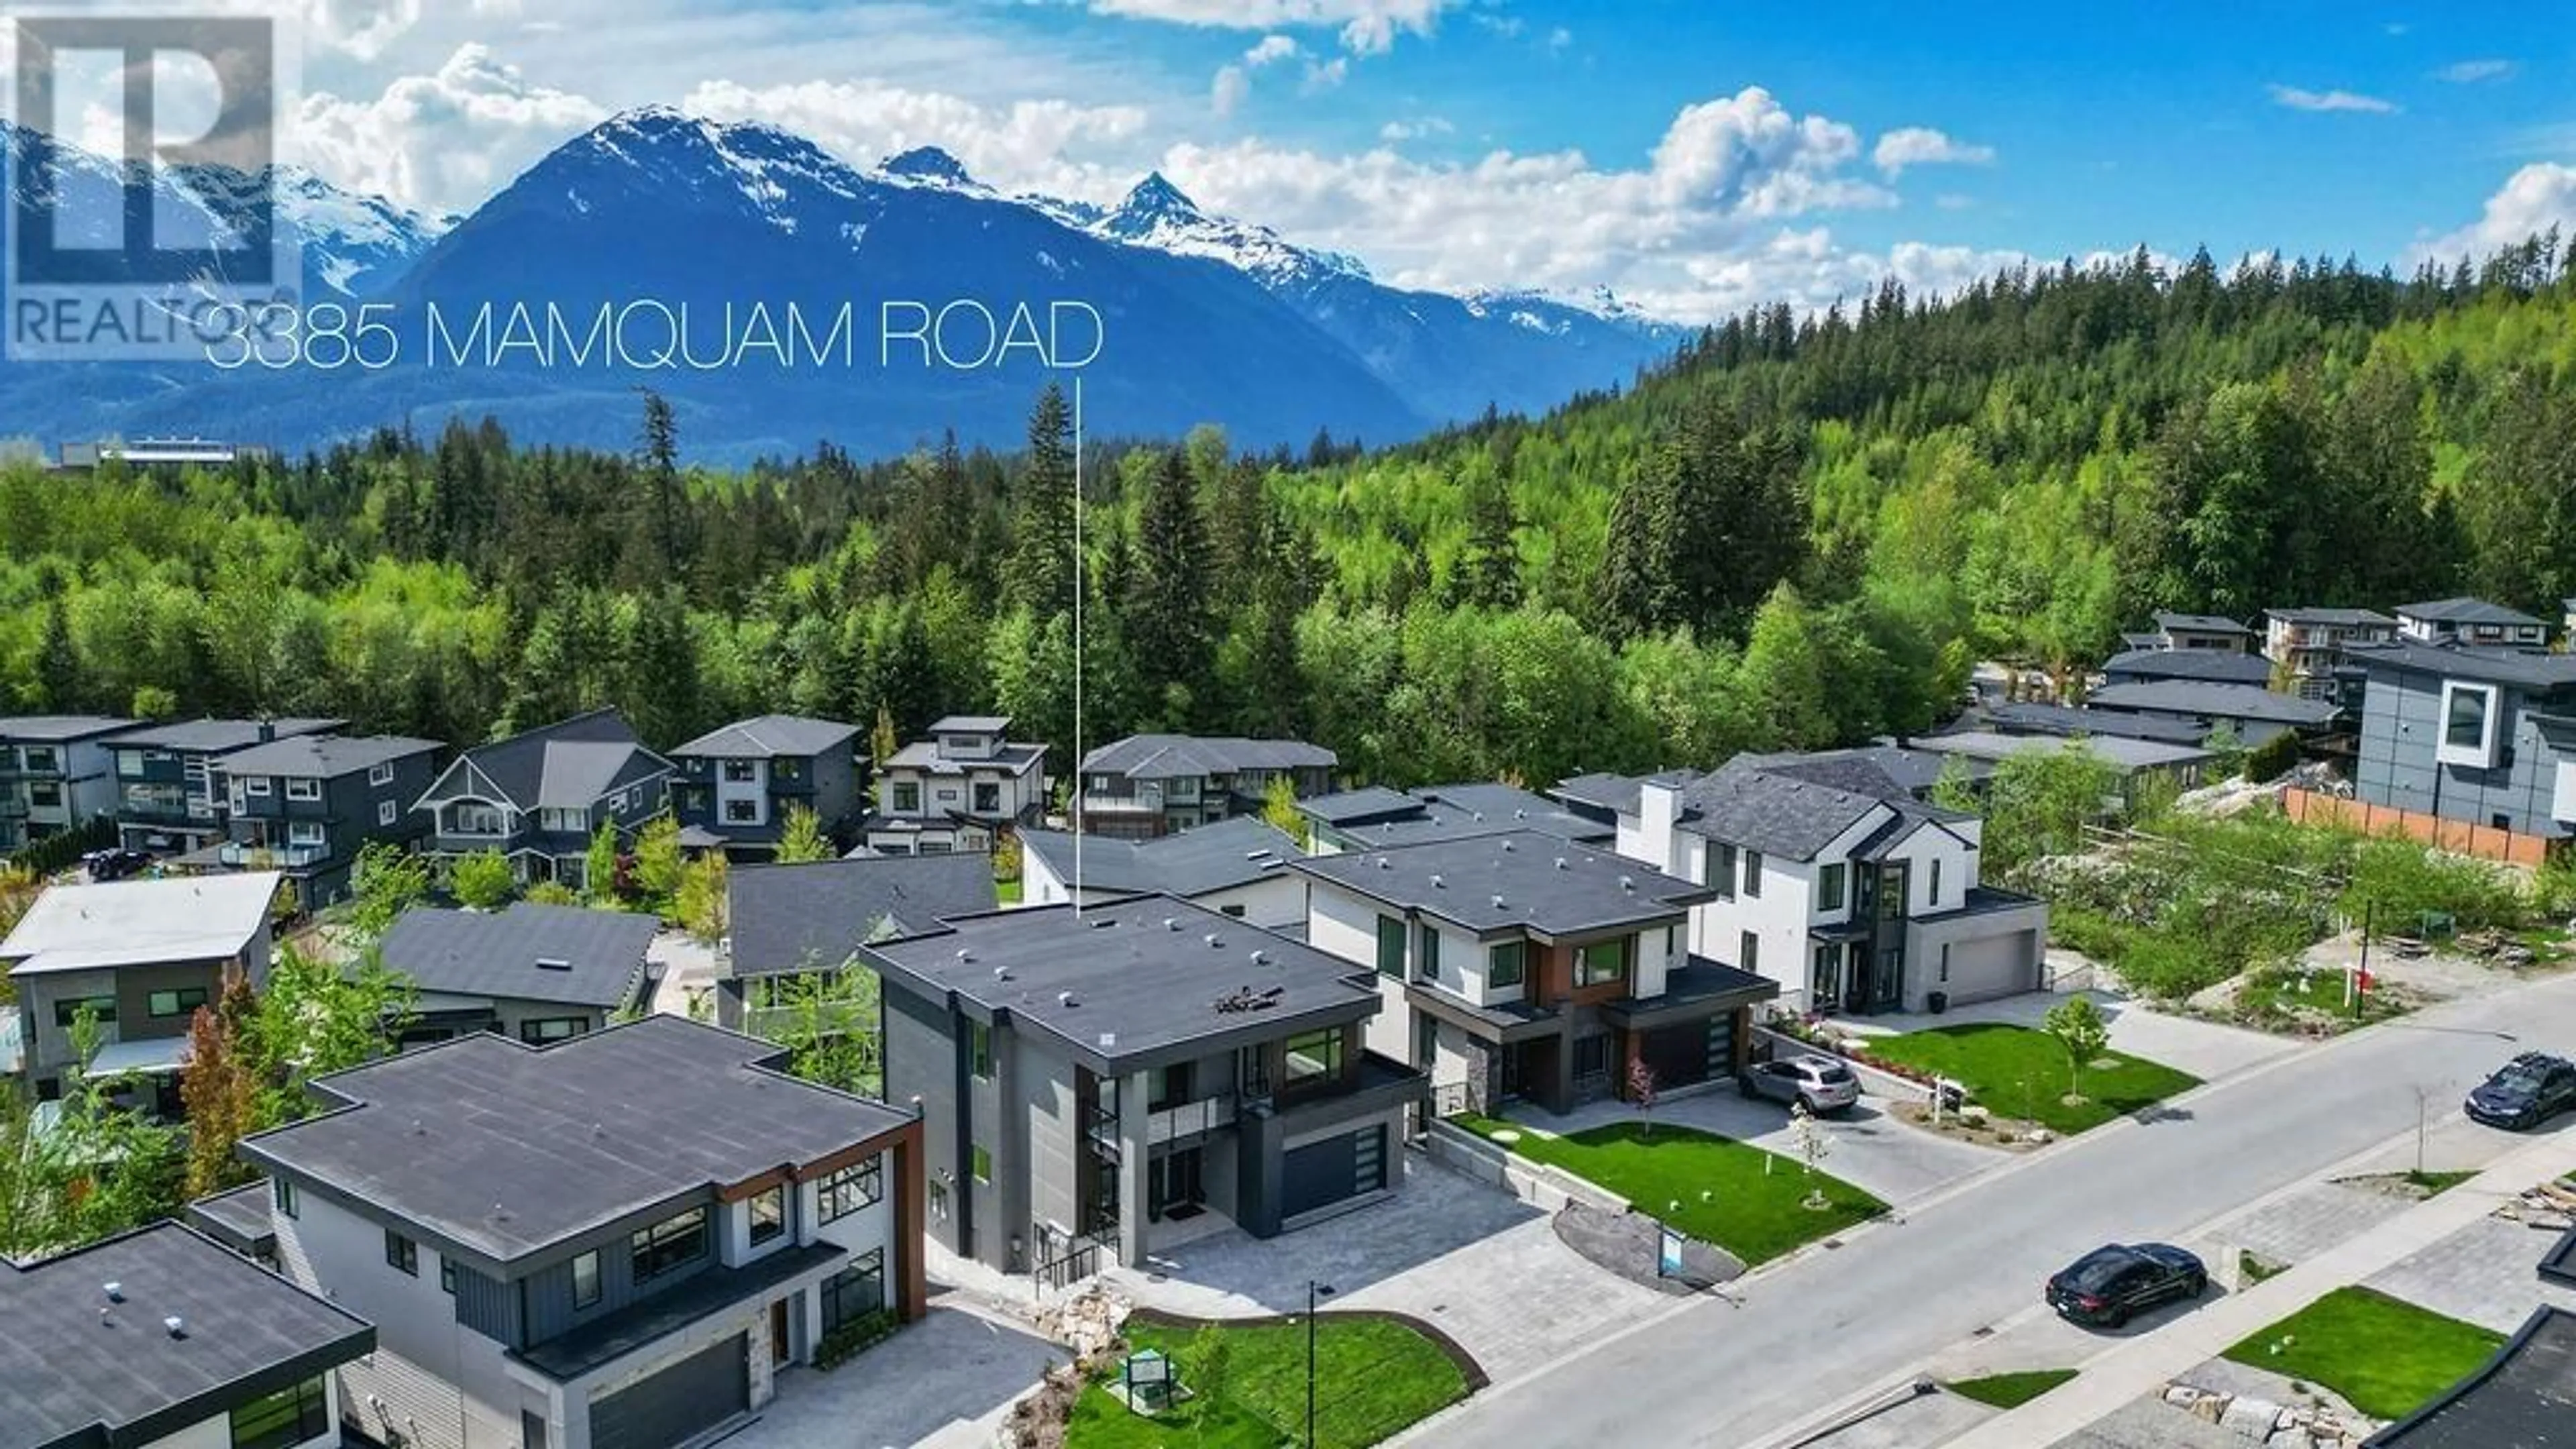 A pic from exterior of the house or condo for 7 3385 MAMQUAM ROAD, Squamish British Columbia V8B0E3